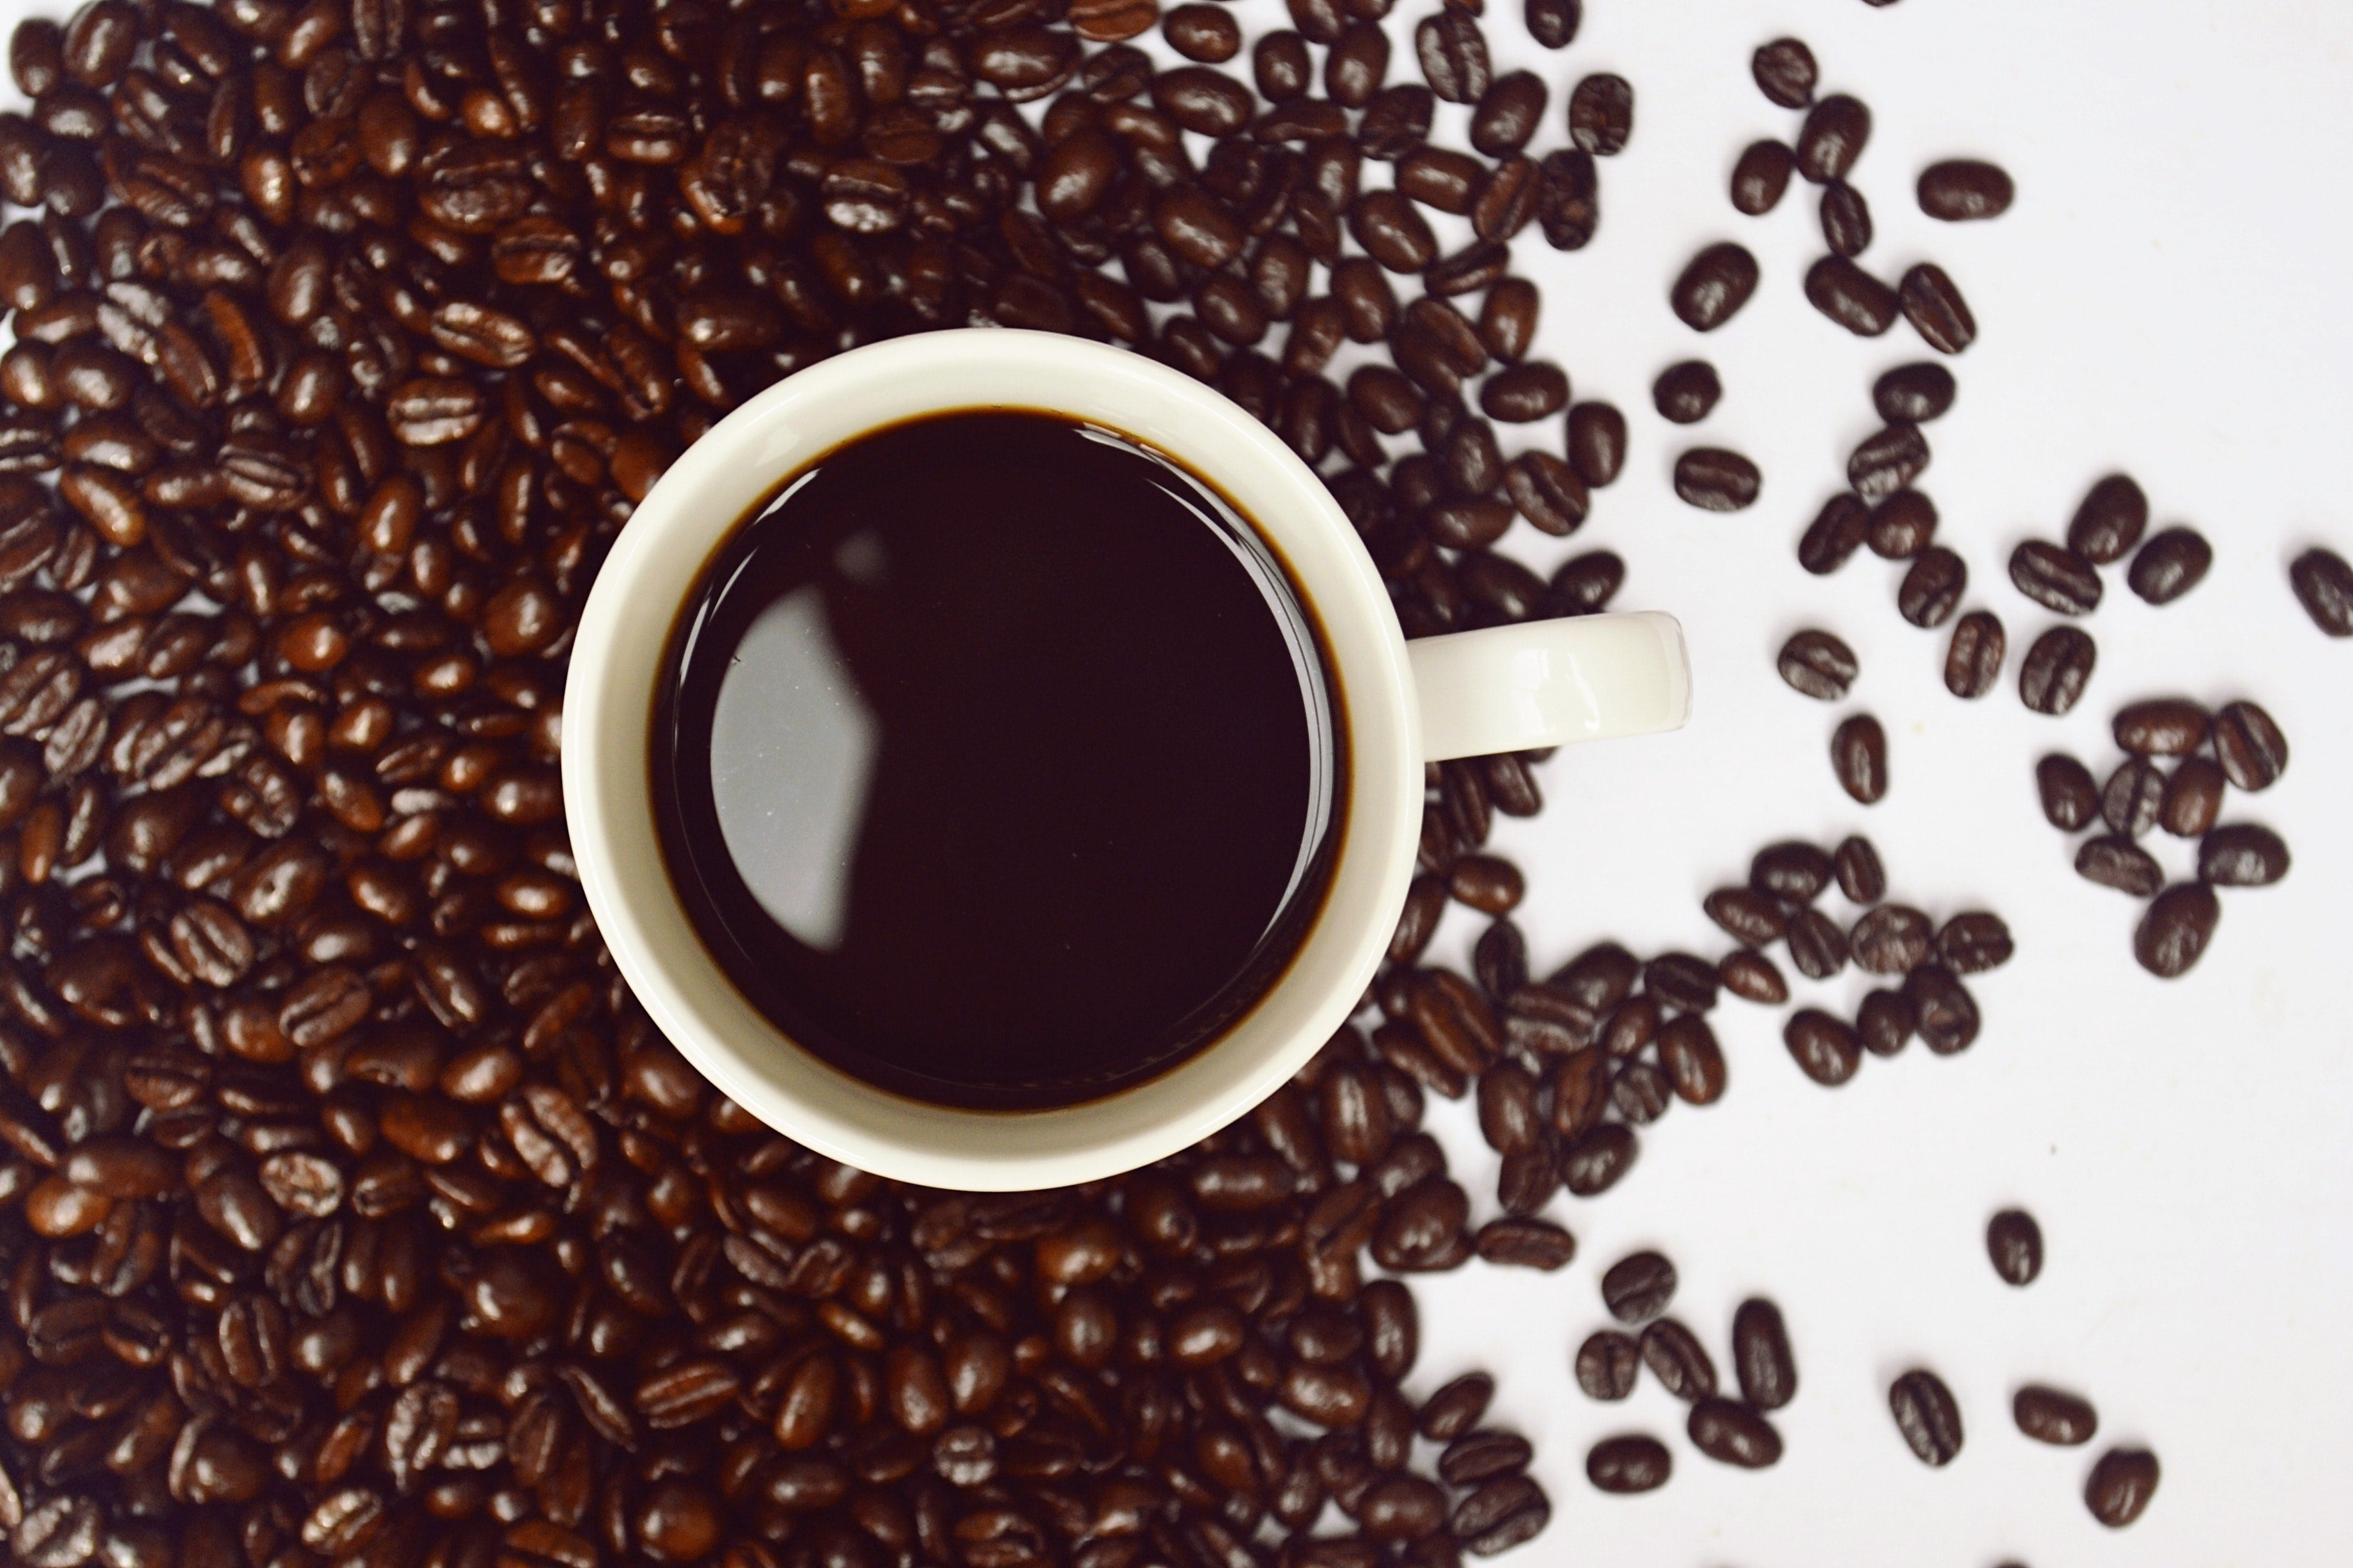 Stay alert: we tell you everything about caffeine